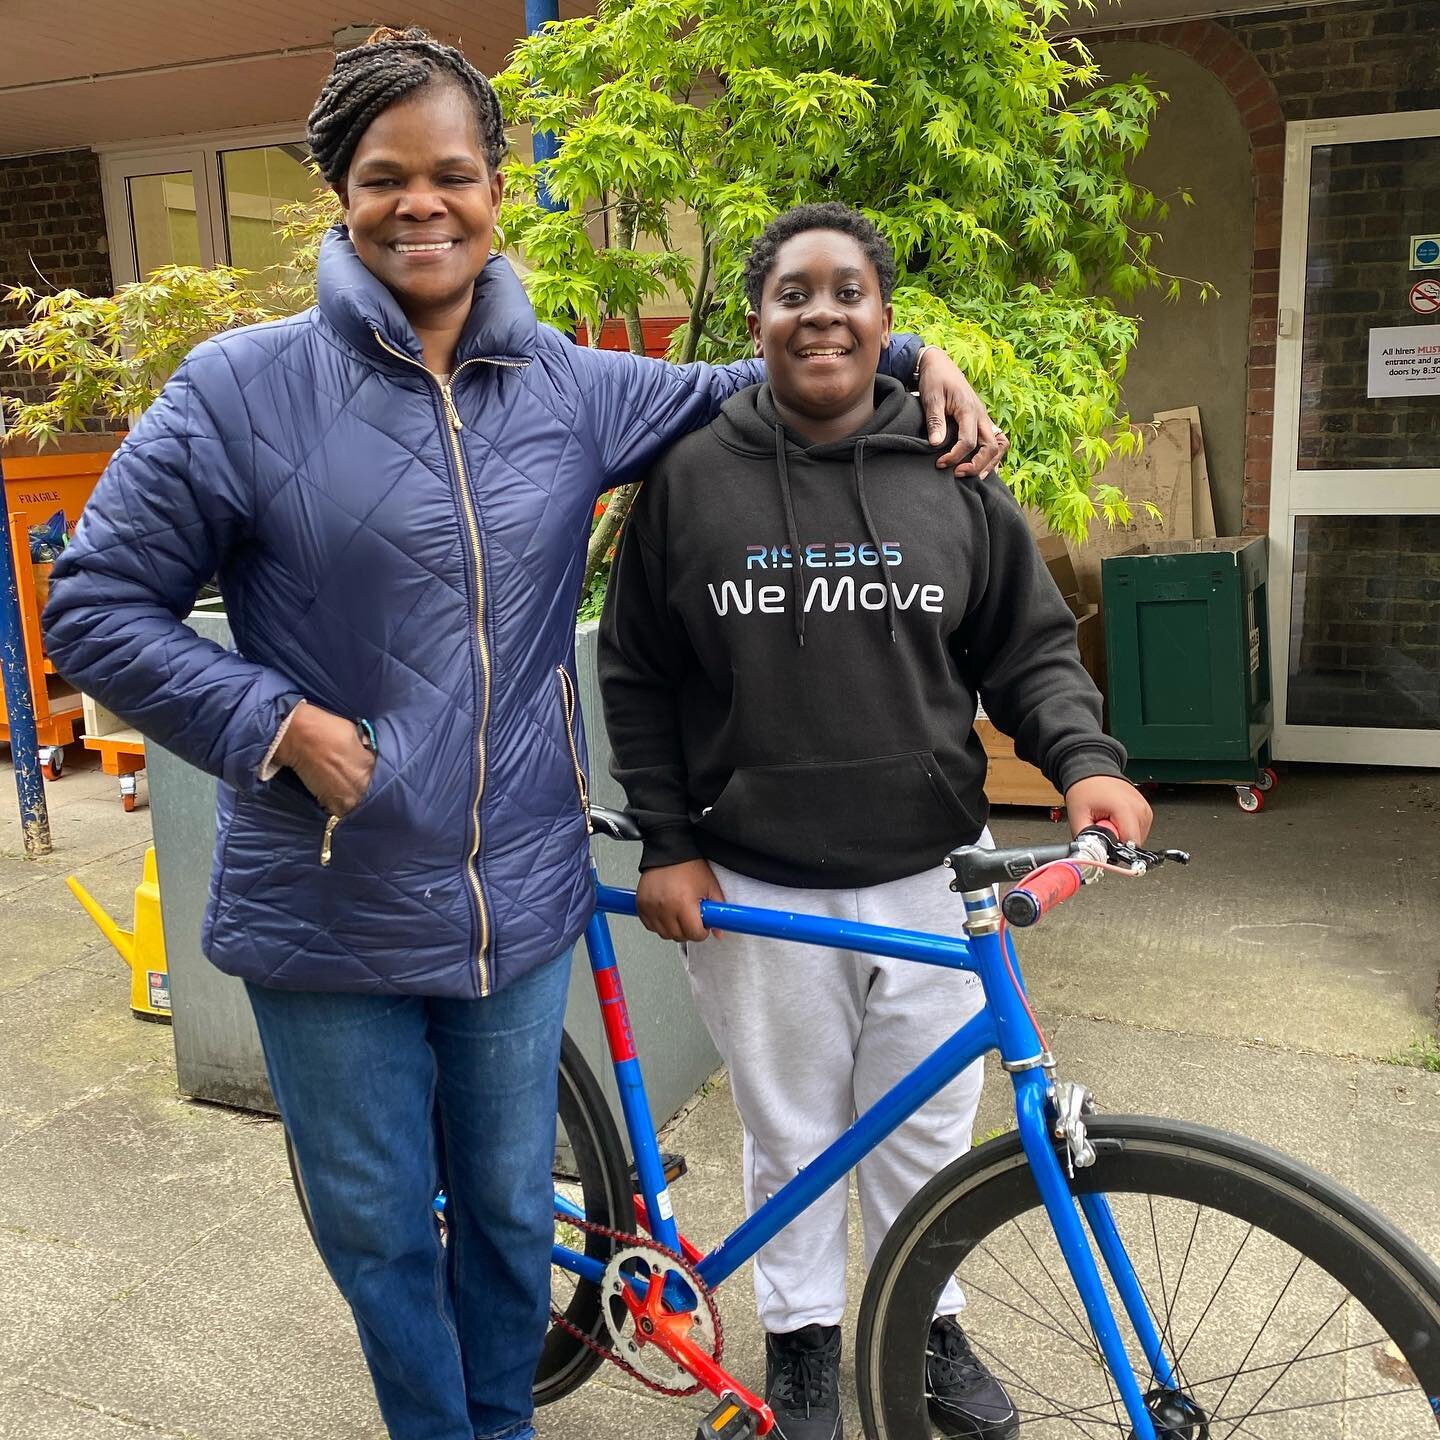 This amazing lady overheard one of our young people saying his bike had been stolen while she was at the Community Shop, and decided to gift money to help buy a replacement. The rest came from our latest crowdfunder. @madeupkitchen and @rise.365 have